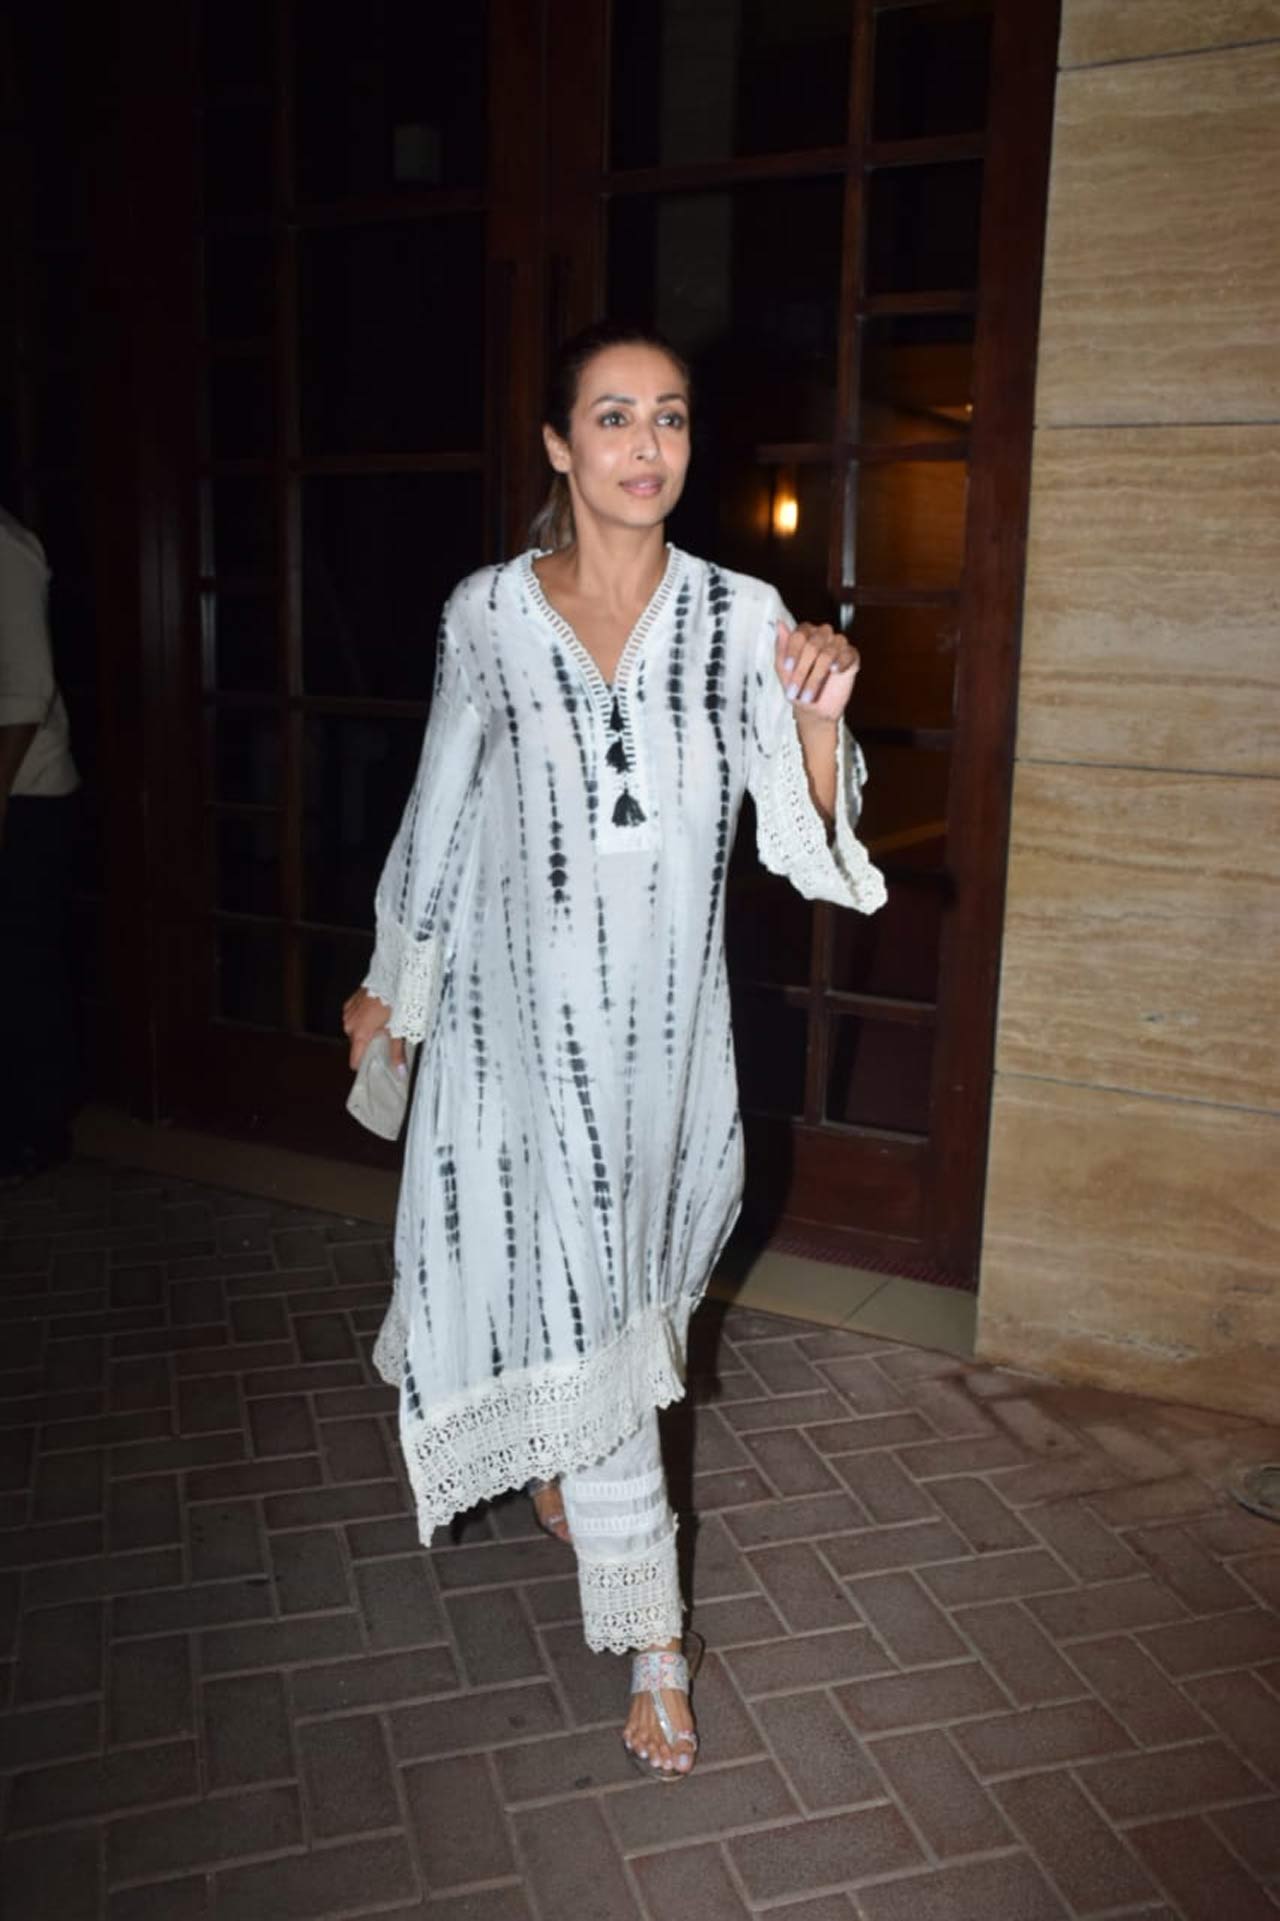 Malaika Arora stunned in a kaftan dress as she stepped out to attend Rhea Kapoor's party. The super fun get-together was also attended by their mutual friend and actor Amrita Arora as well as Kareena's manager Poonam Damania. Taking to her Instagram handle, Kareena shared glimpses of their fun time as they laughed, ate and posed for pictures.